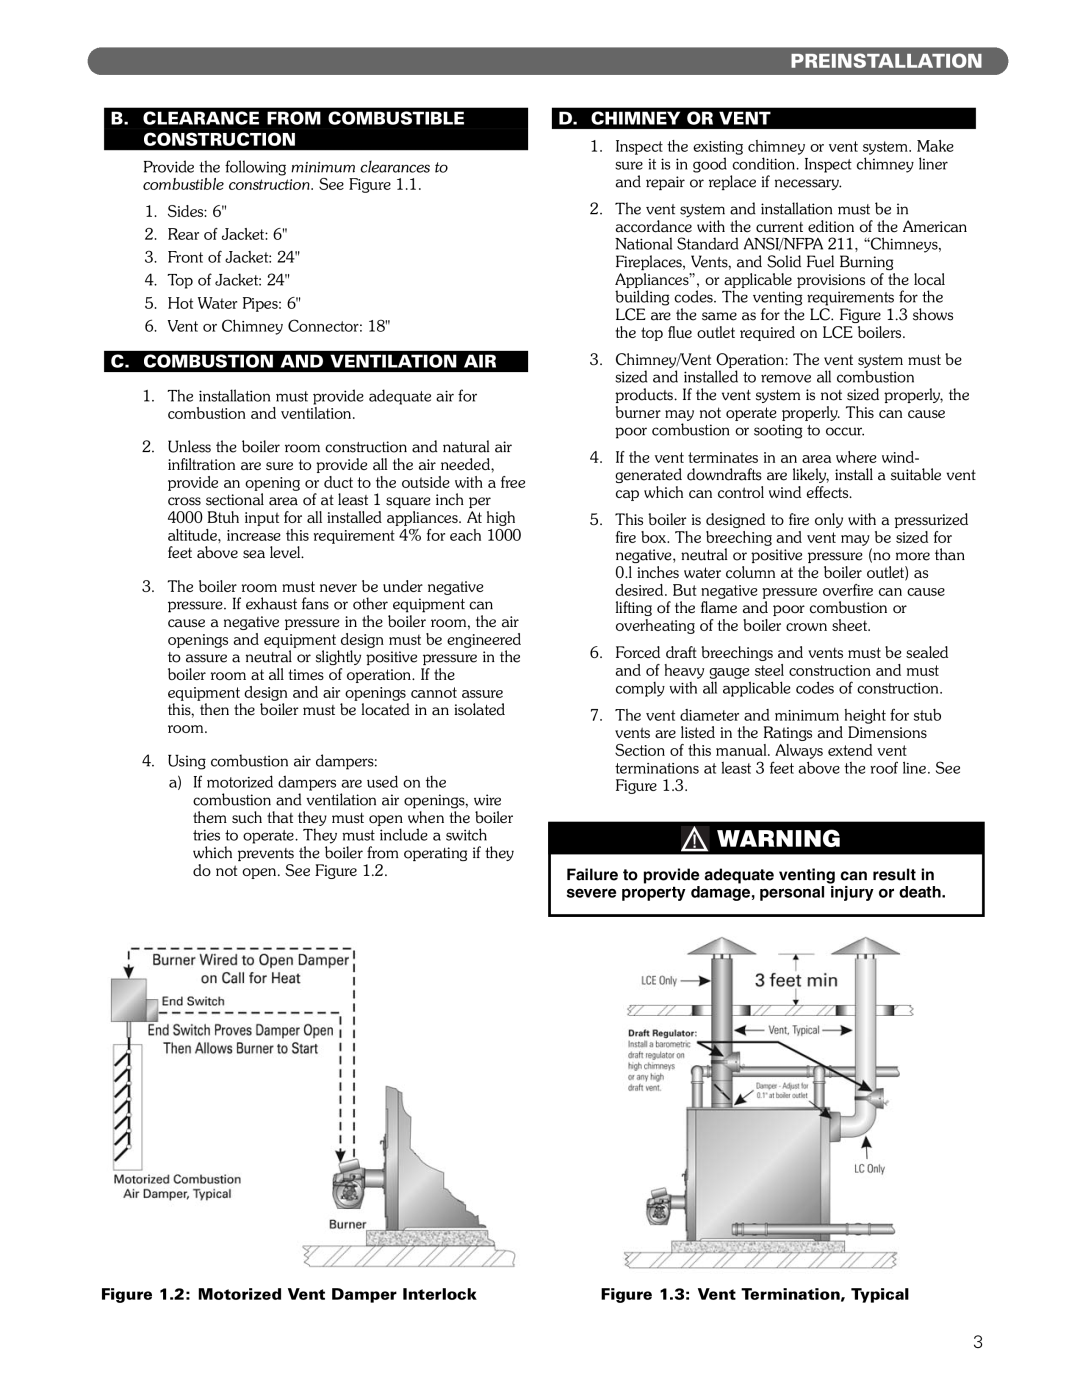 PB Heat Gas/Oil Boilers manual Preinstallation, B.Clearance From Combustible Construction, C.Combustion And Ventilation Air 